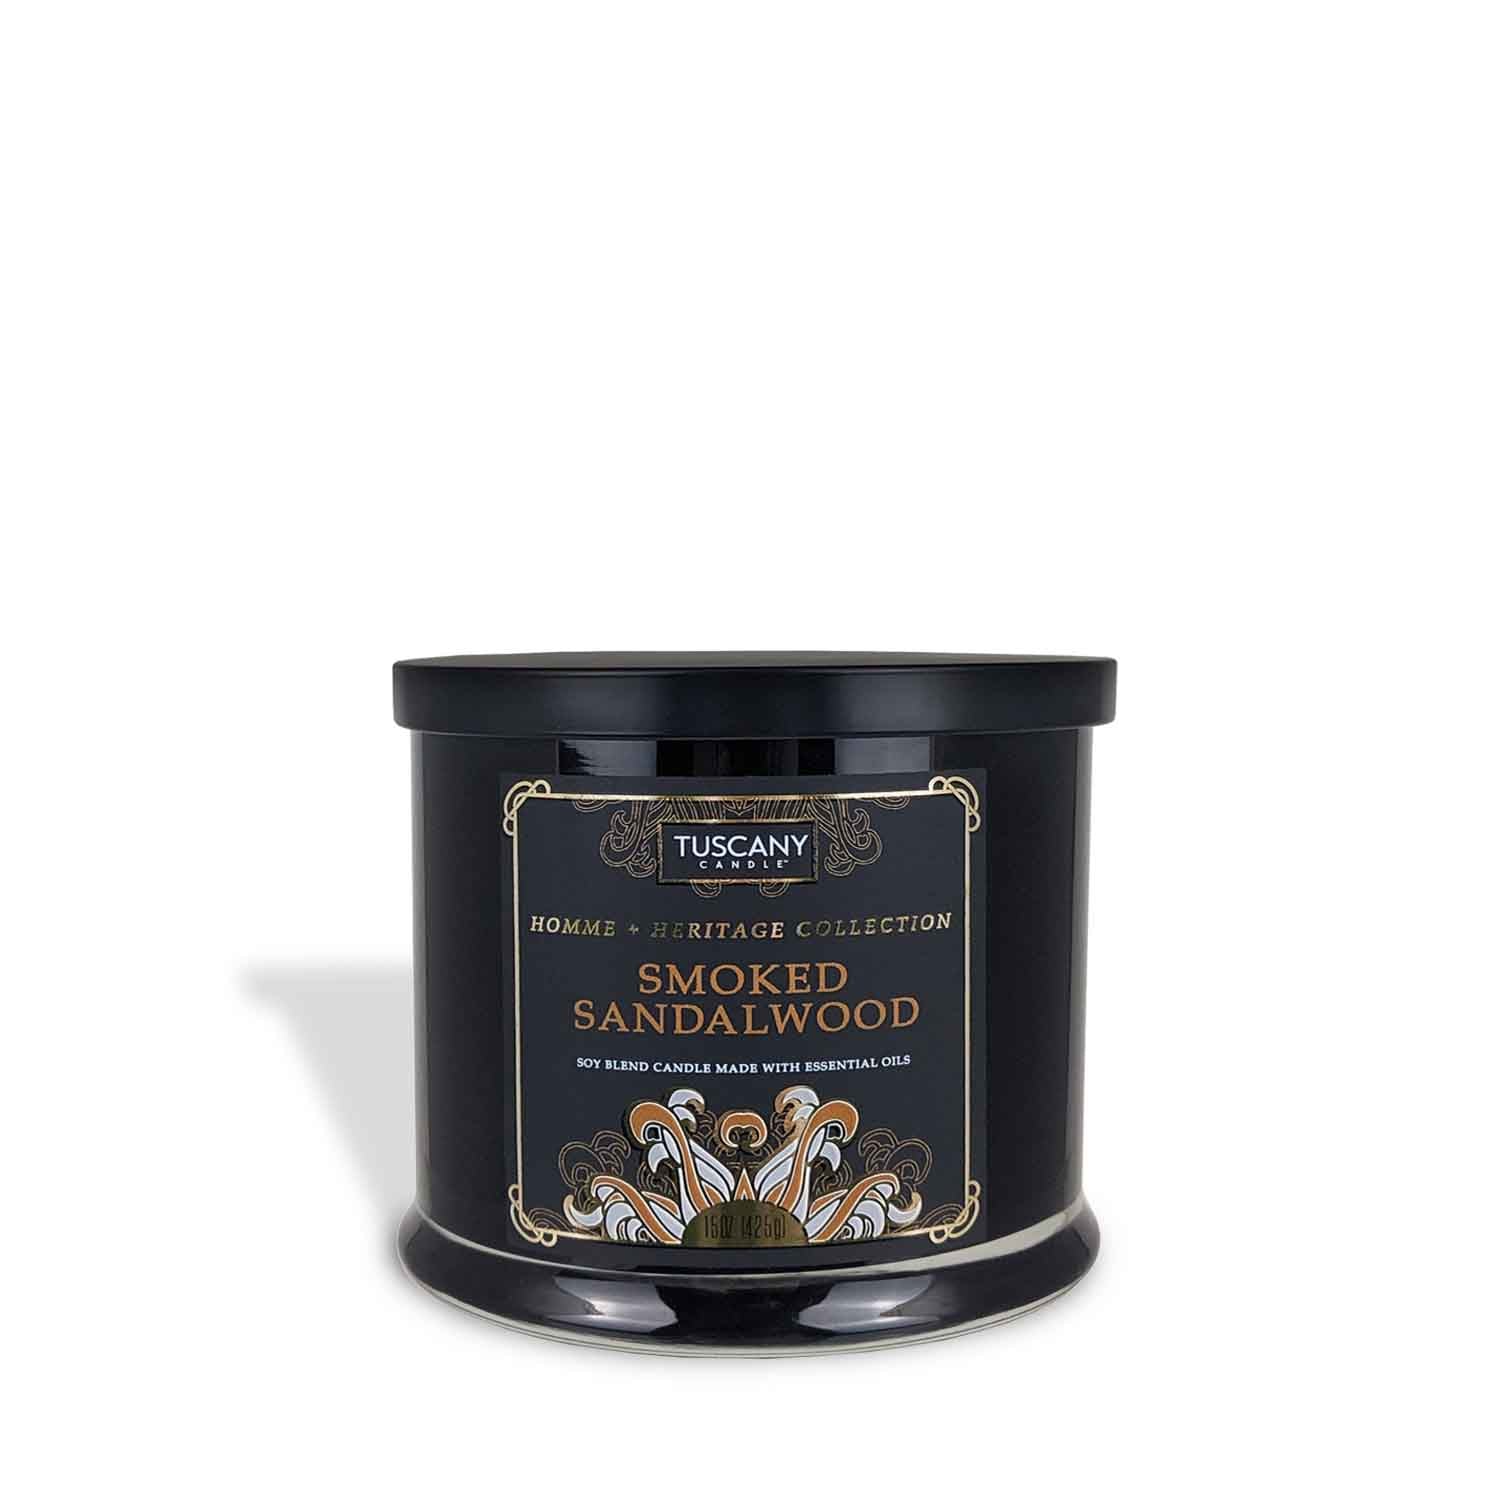 A masculine black tin with a Smoked Sandalwood scented jar candle (15 oz) from the Homme + Heritage Collection by Tuscany Candle in it.